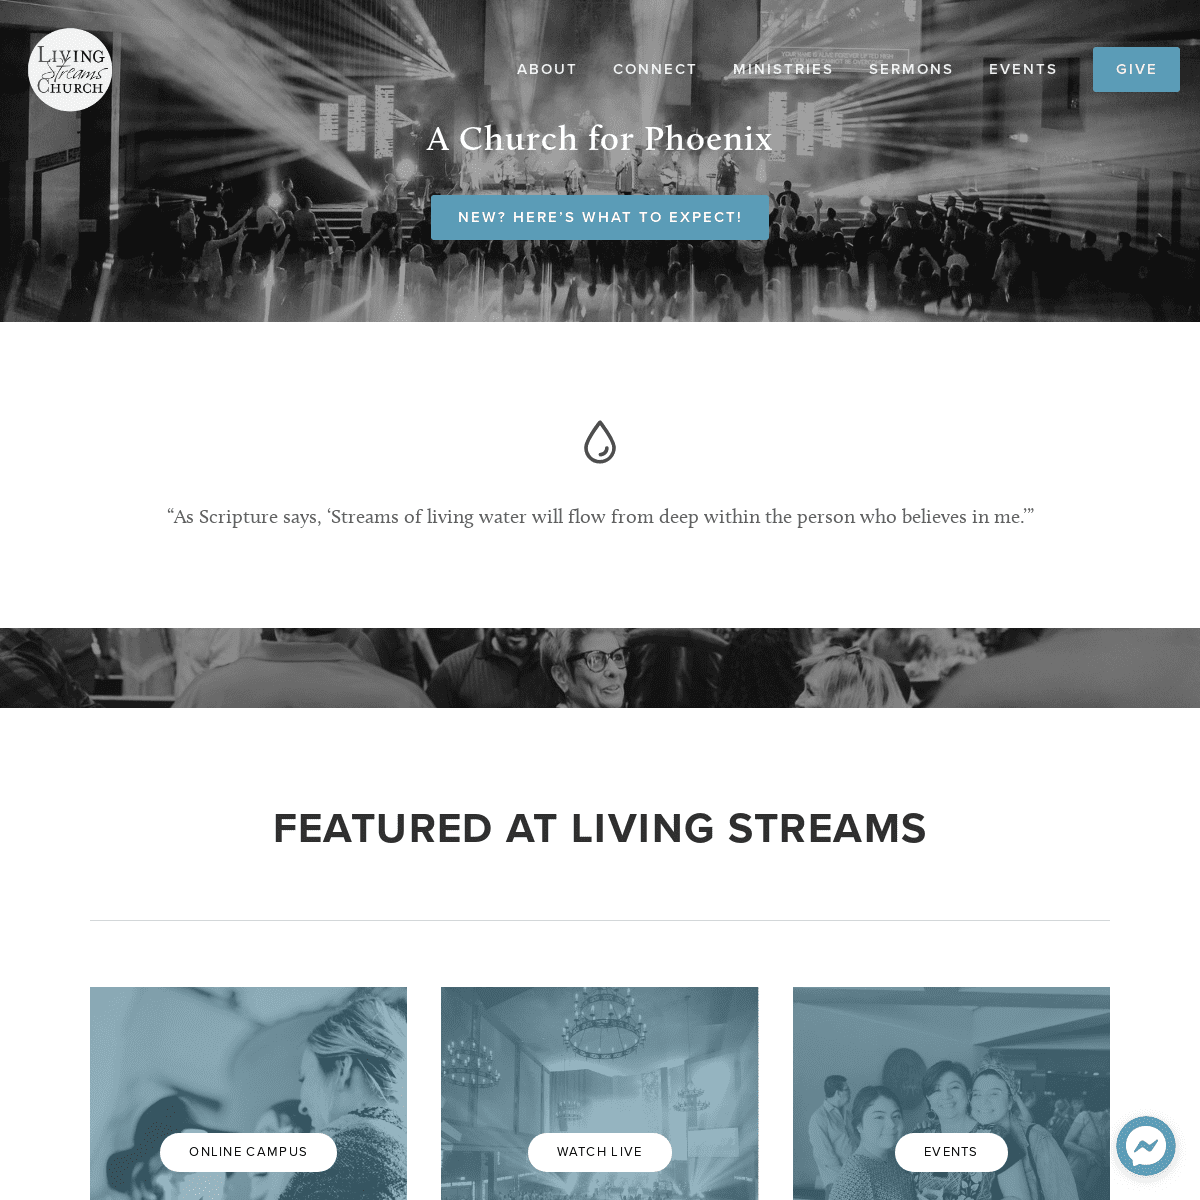 A complete backup of livingstreams.org